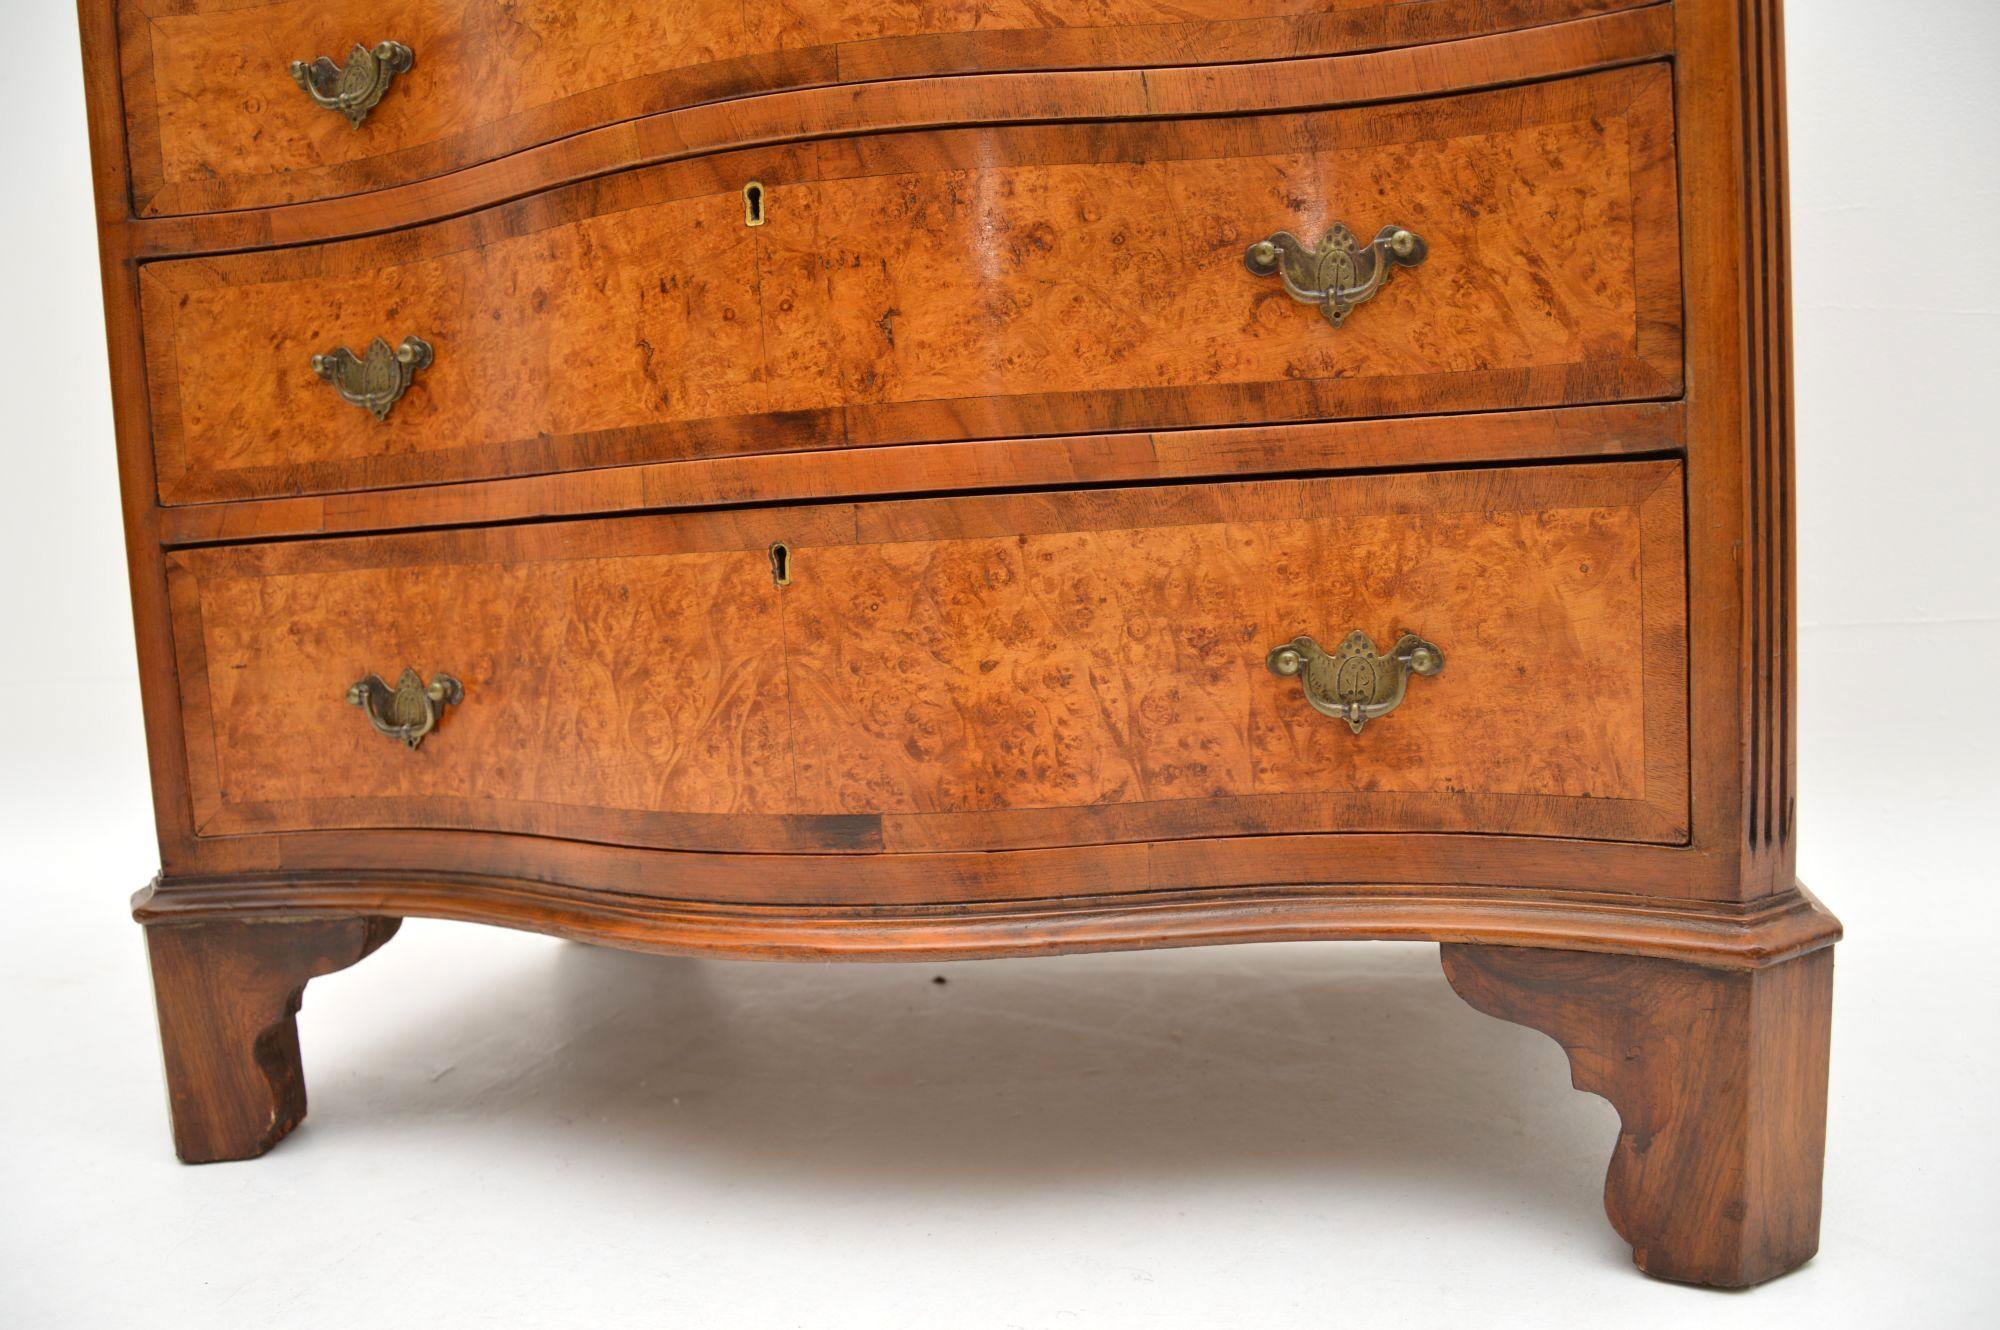 Edwardian Antique Serpentine Fronted Burr Walnut Chest of Drawers